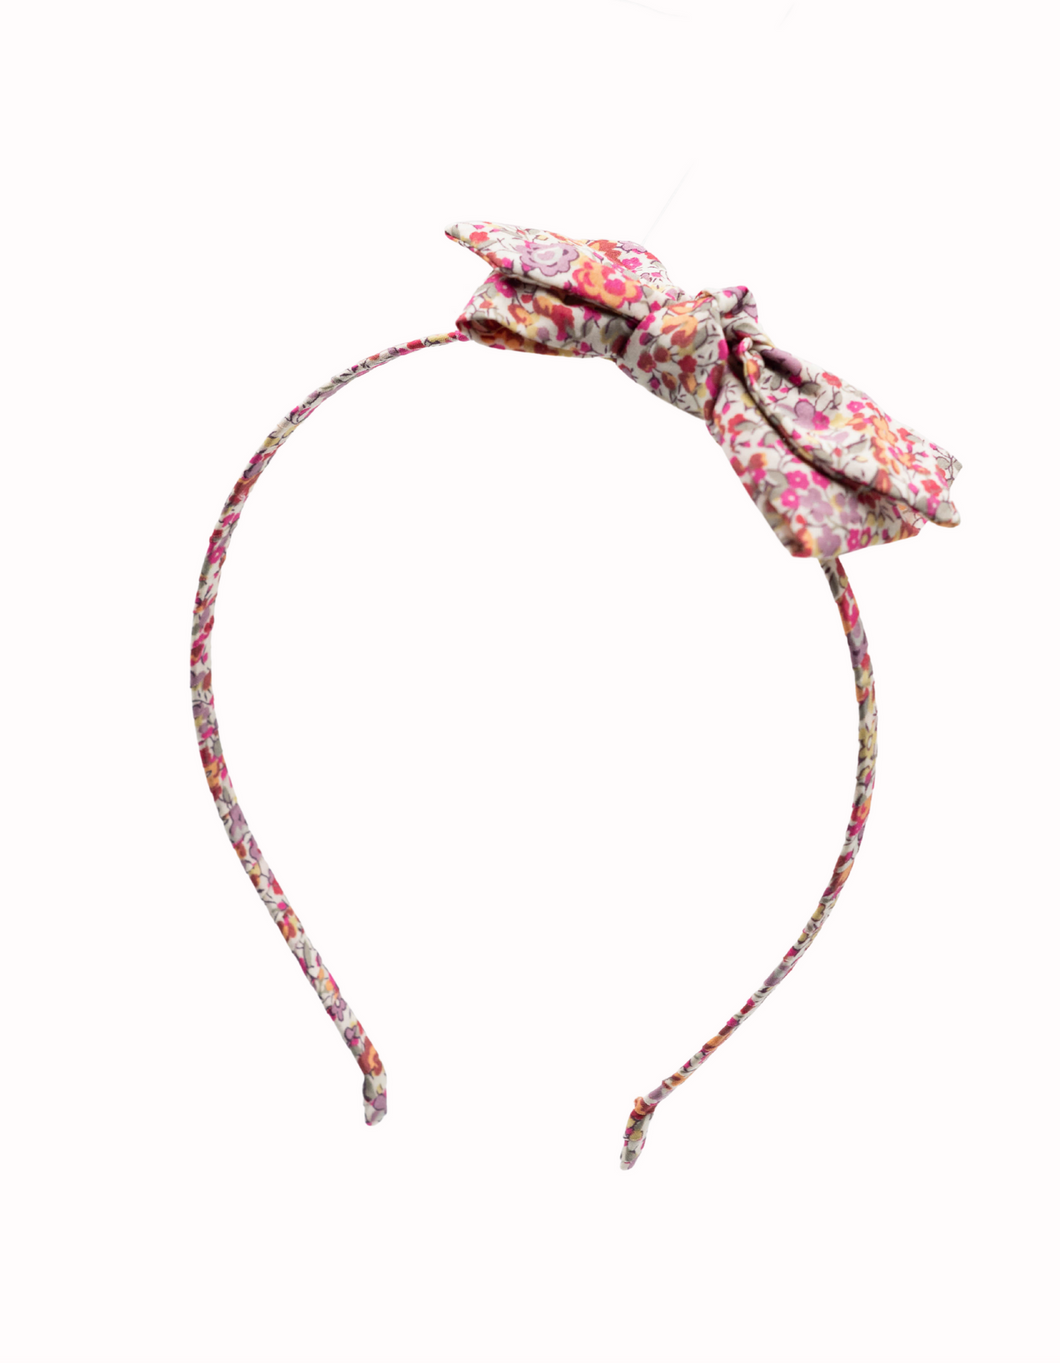 Livy Lou Collection Liberty of London Headband Tana Lawn Cotton Augusta Red